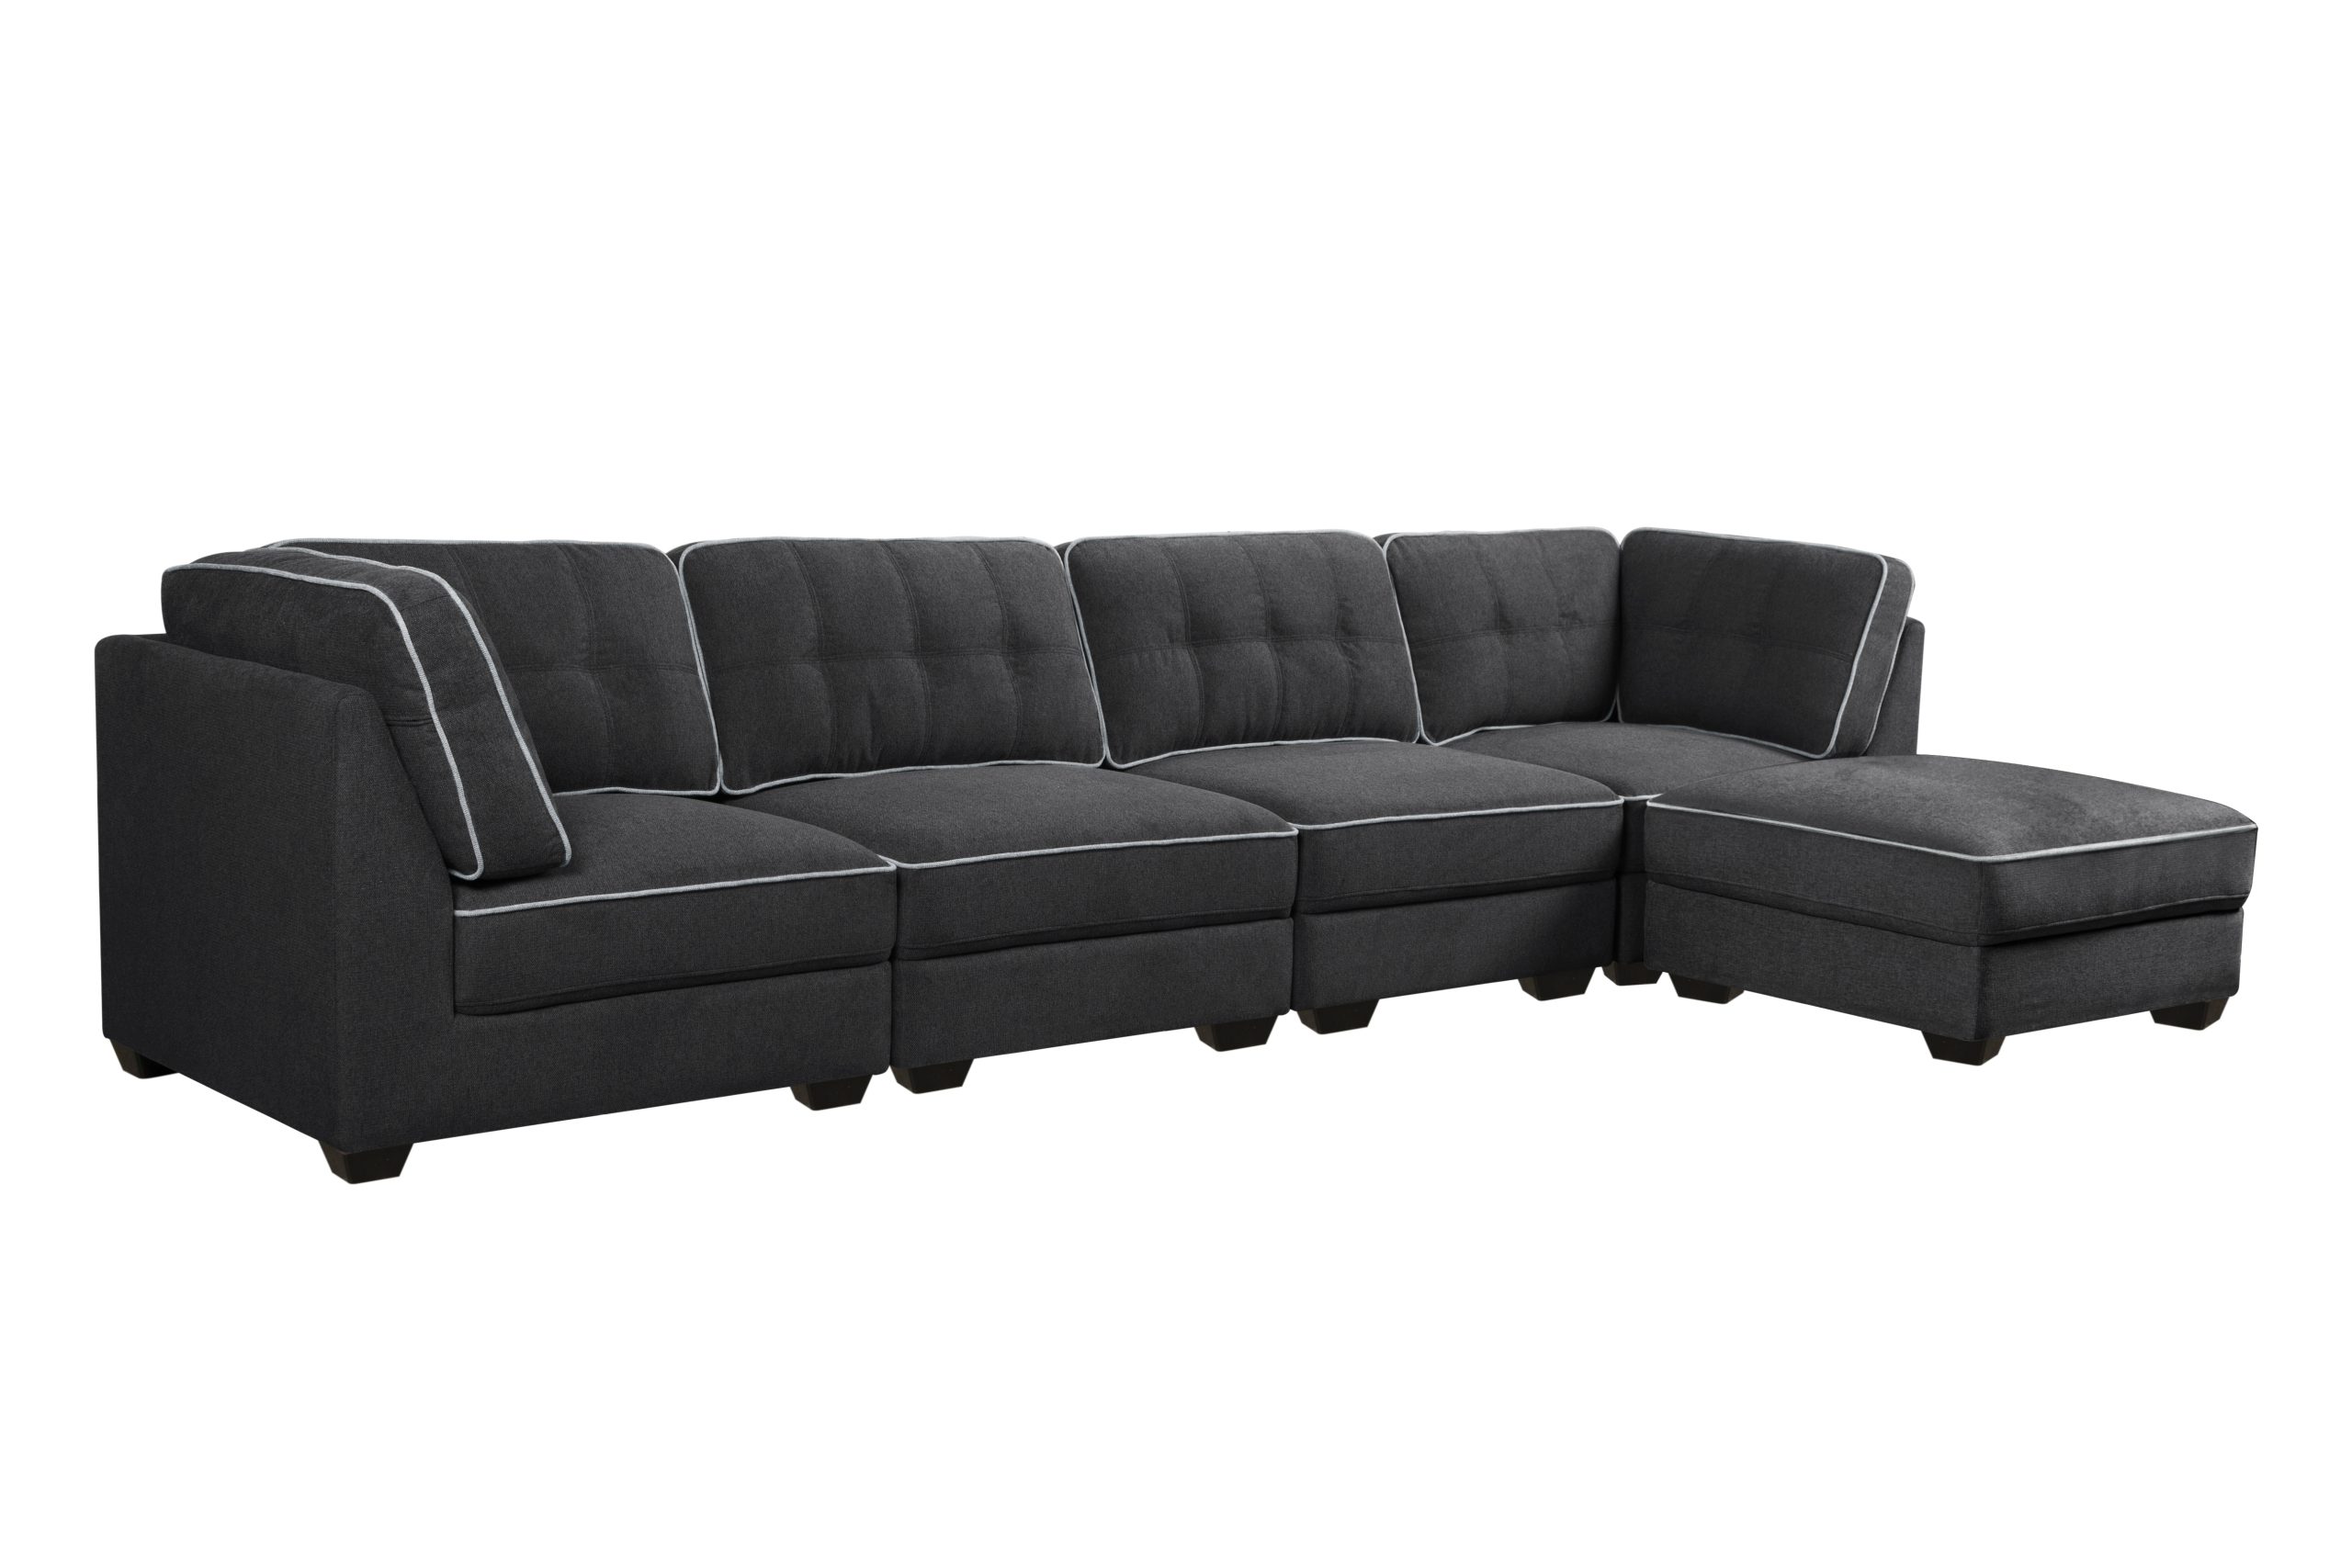 Pyrmont 4 Seater + Ottoman - Monster Furniture Clearance Depot